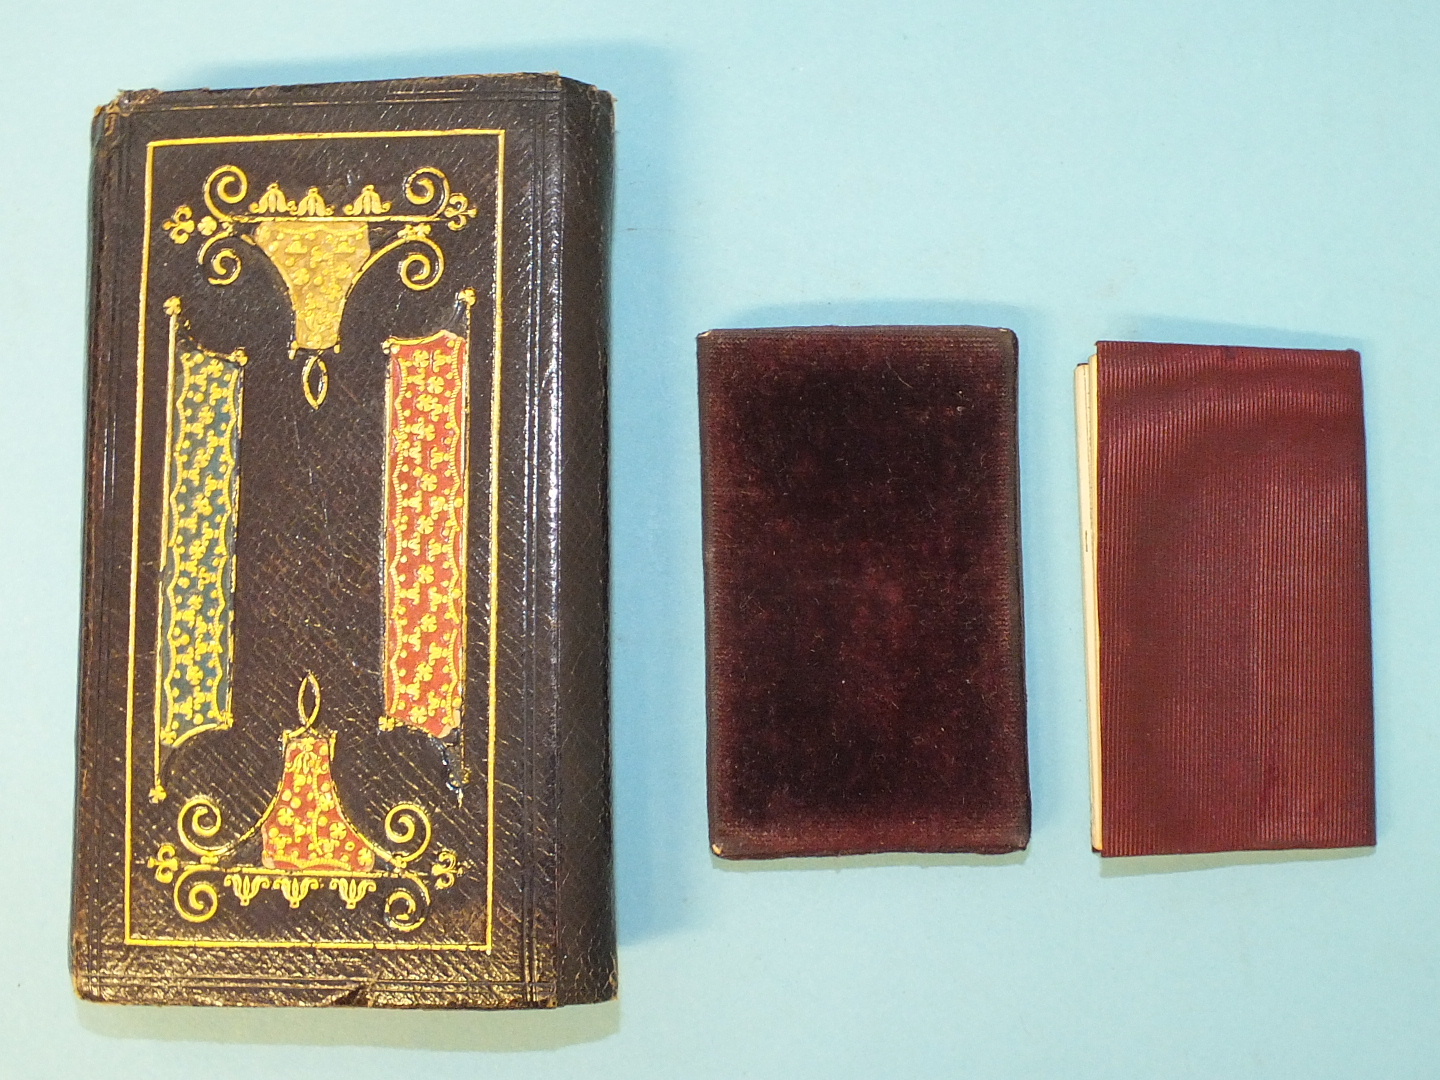 Goldsmith (John), An Almanac for the Year of our Lord 1850, front pocket, pencil pocket, black mor - Image 3 of 3